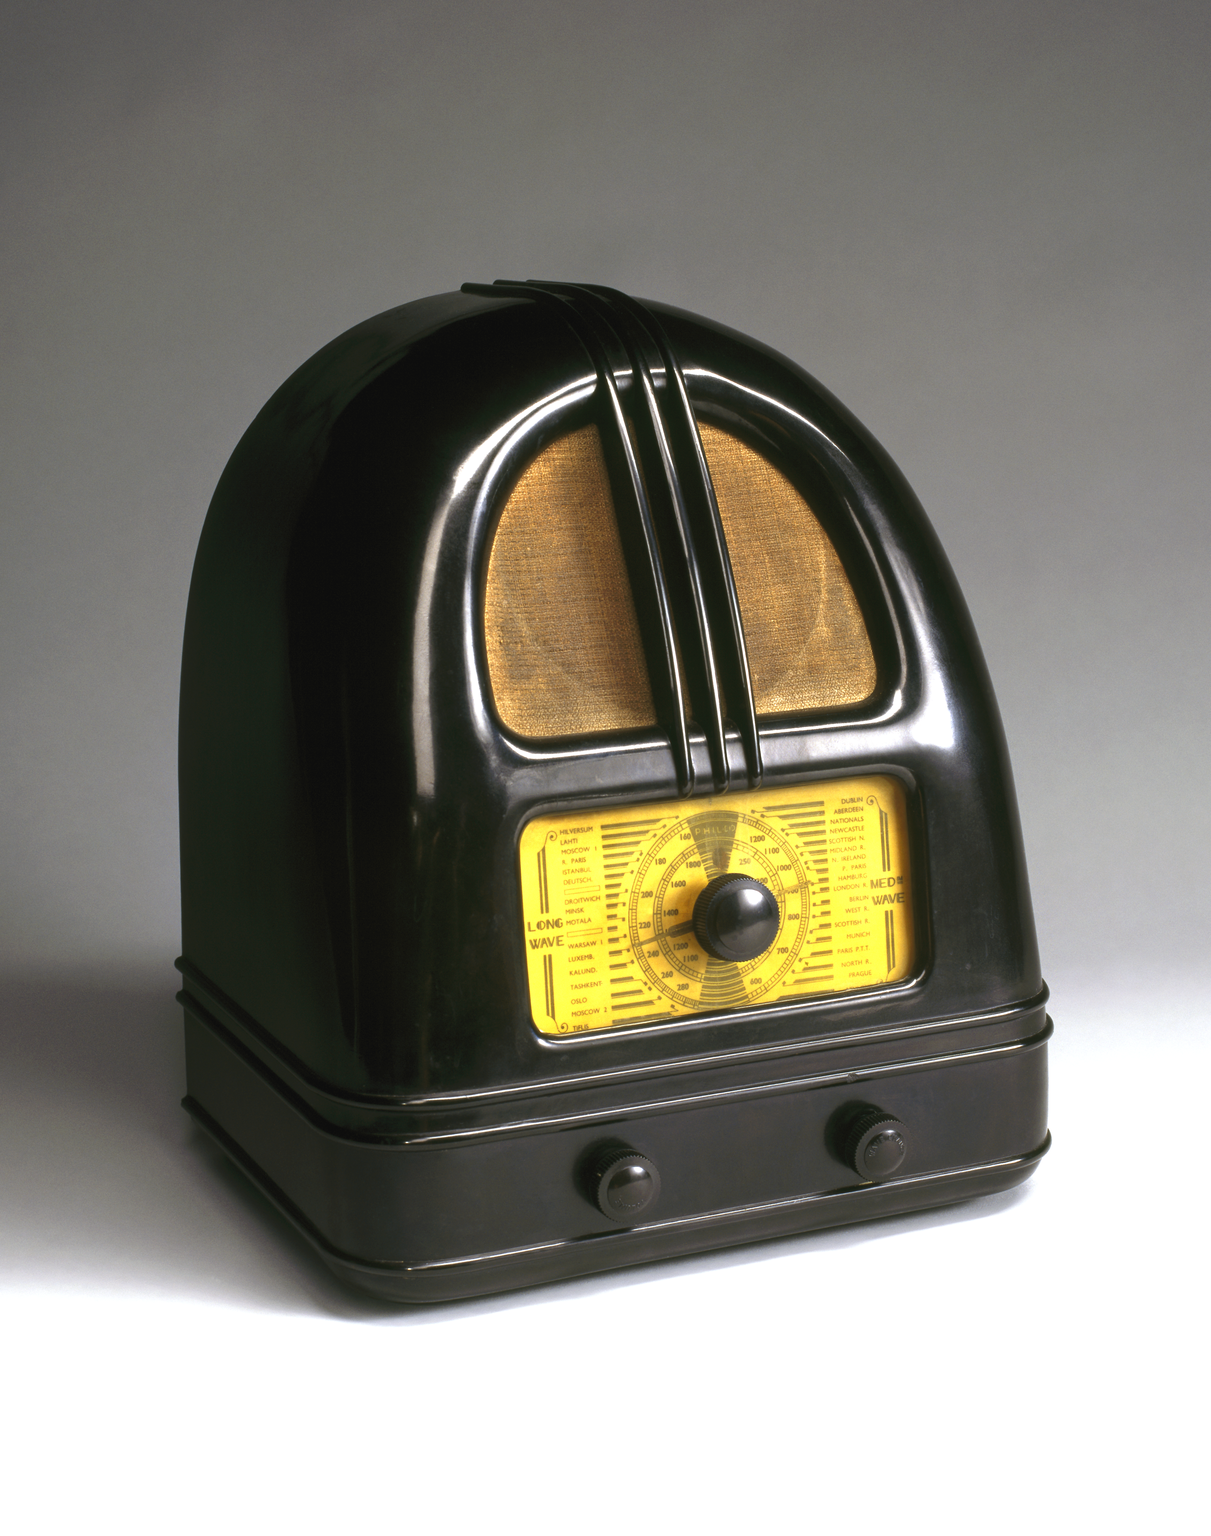 Philco model 444 broadcast receiver (moulded Bakelite cabinet; less back), c. 1936. From a colour transparency in the Science Museum Photographic Archive.